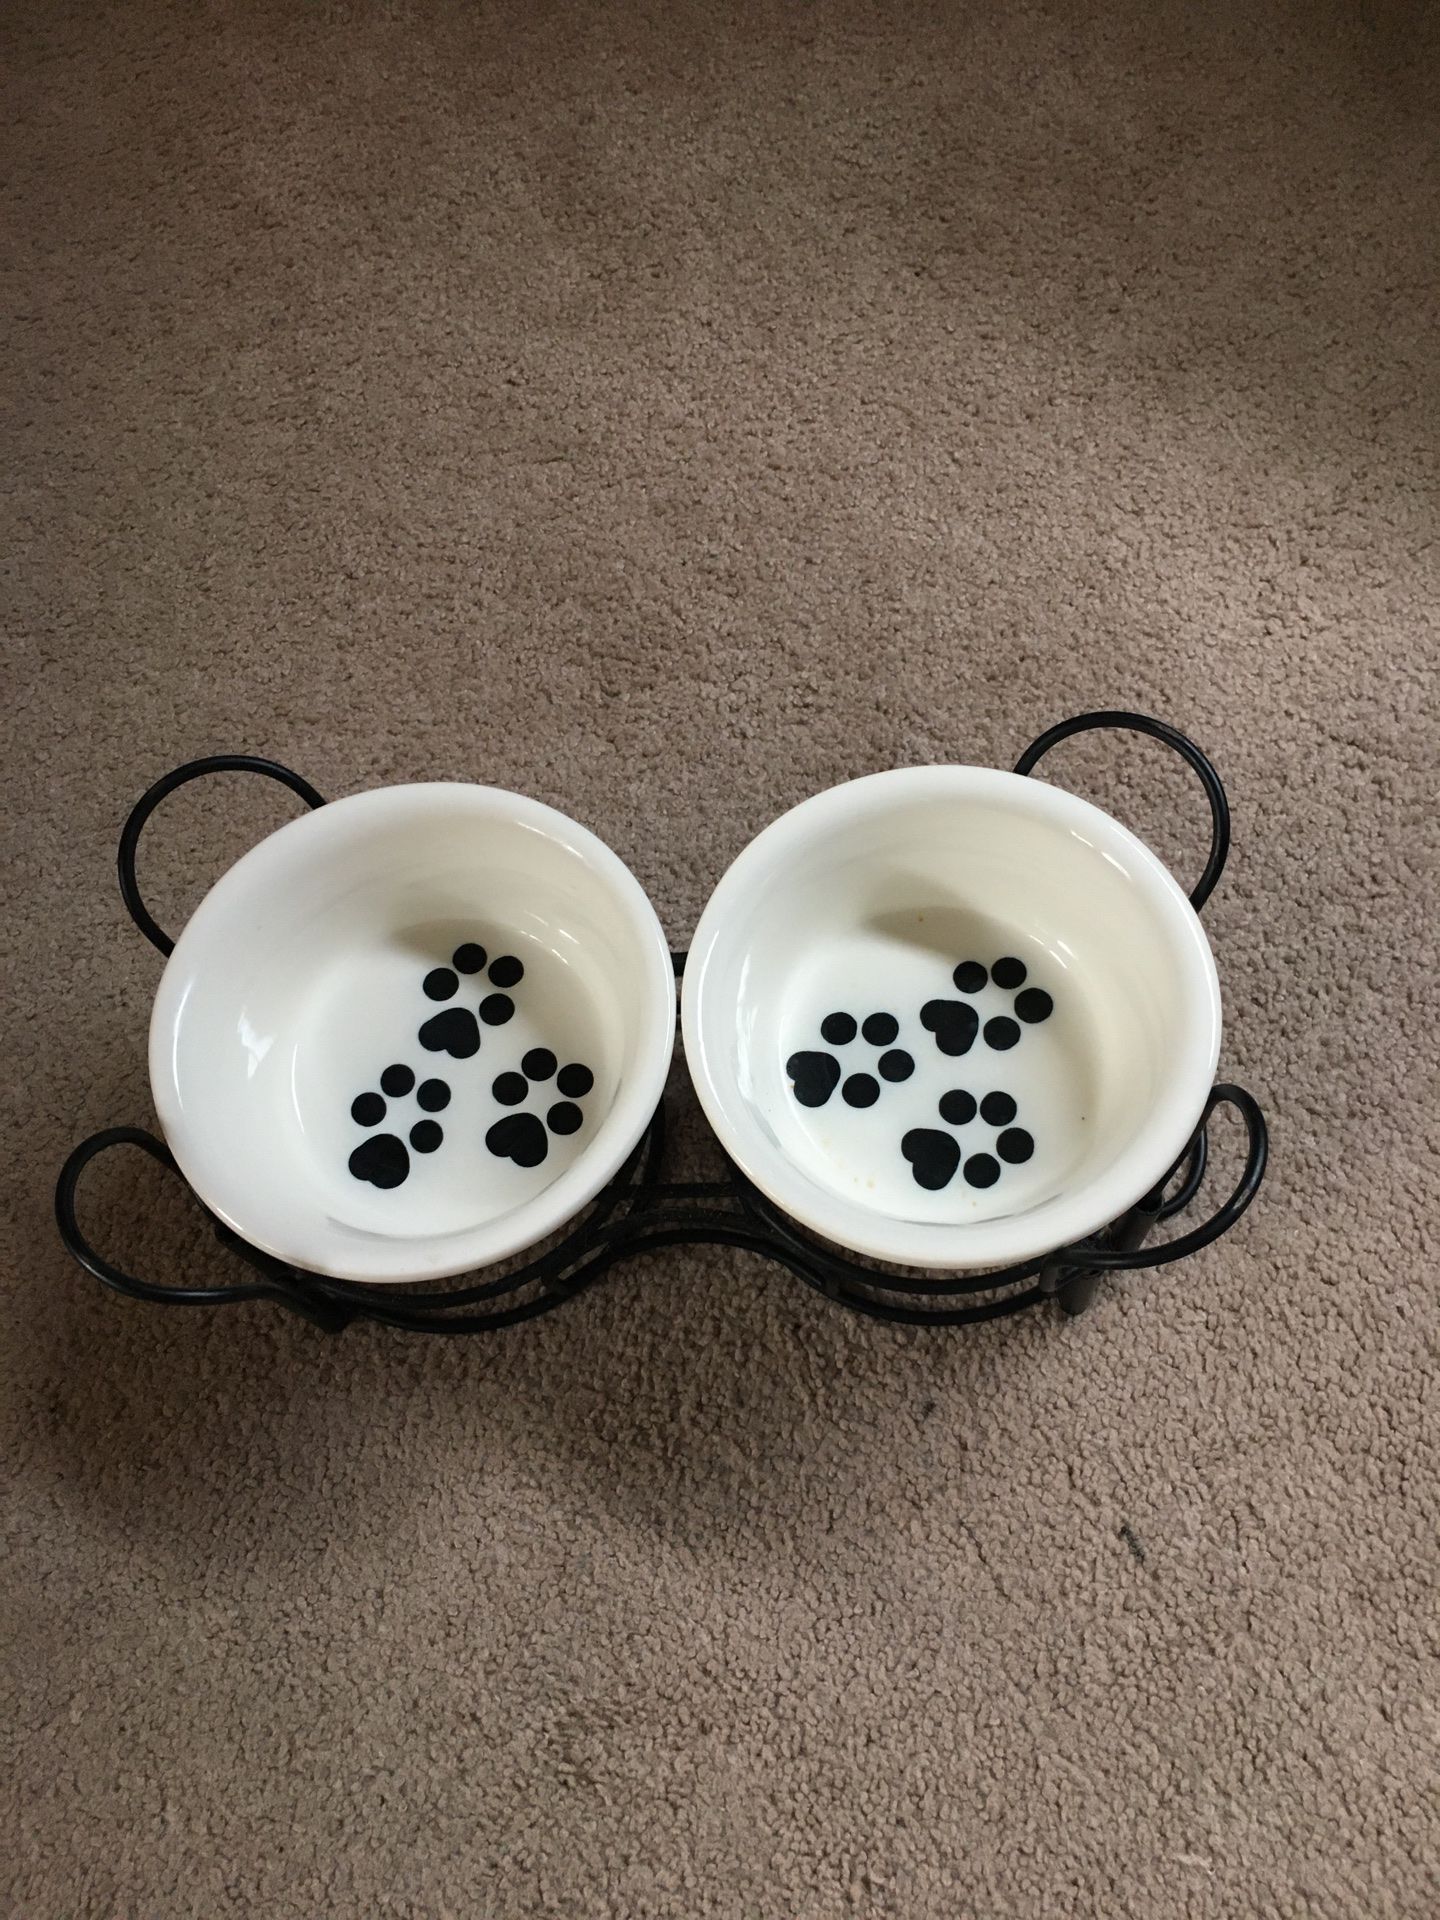 DOG BOWL SET - FOR SMALL TO MEDIUM SIZE DOGS